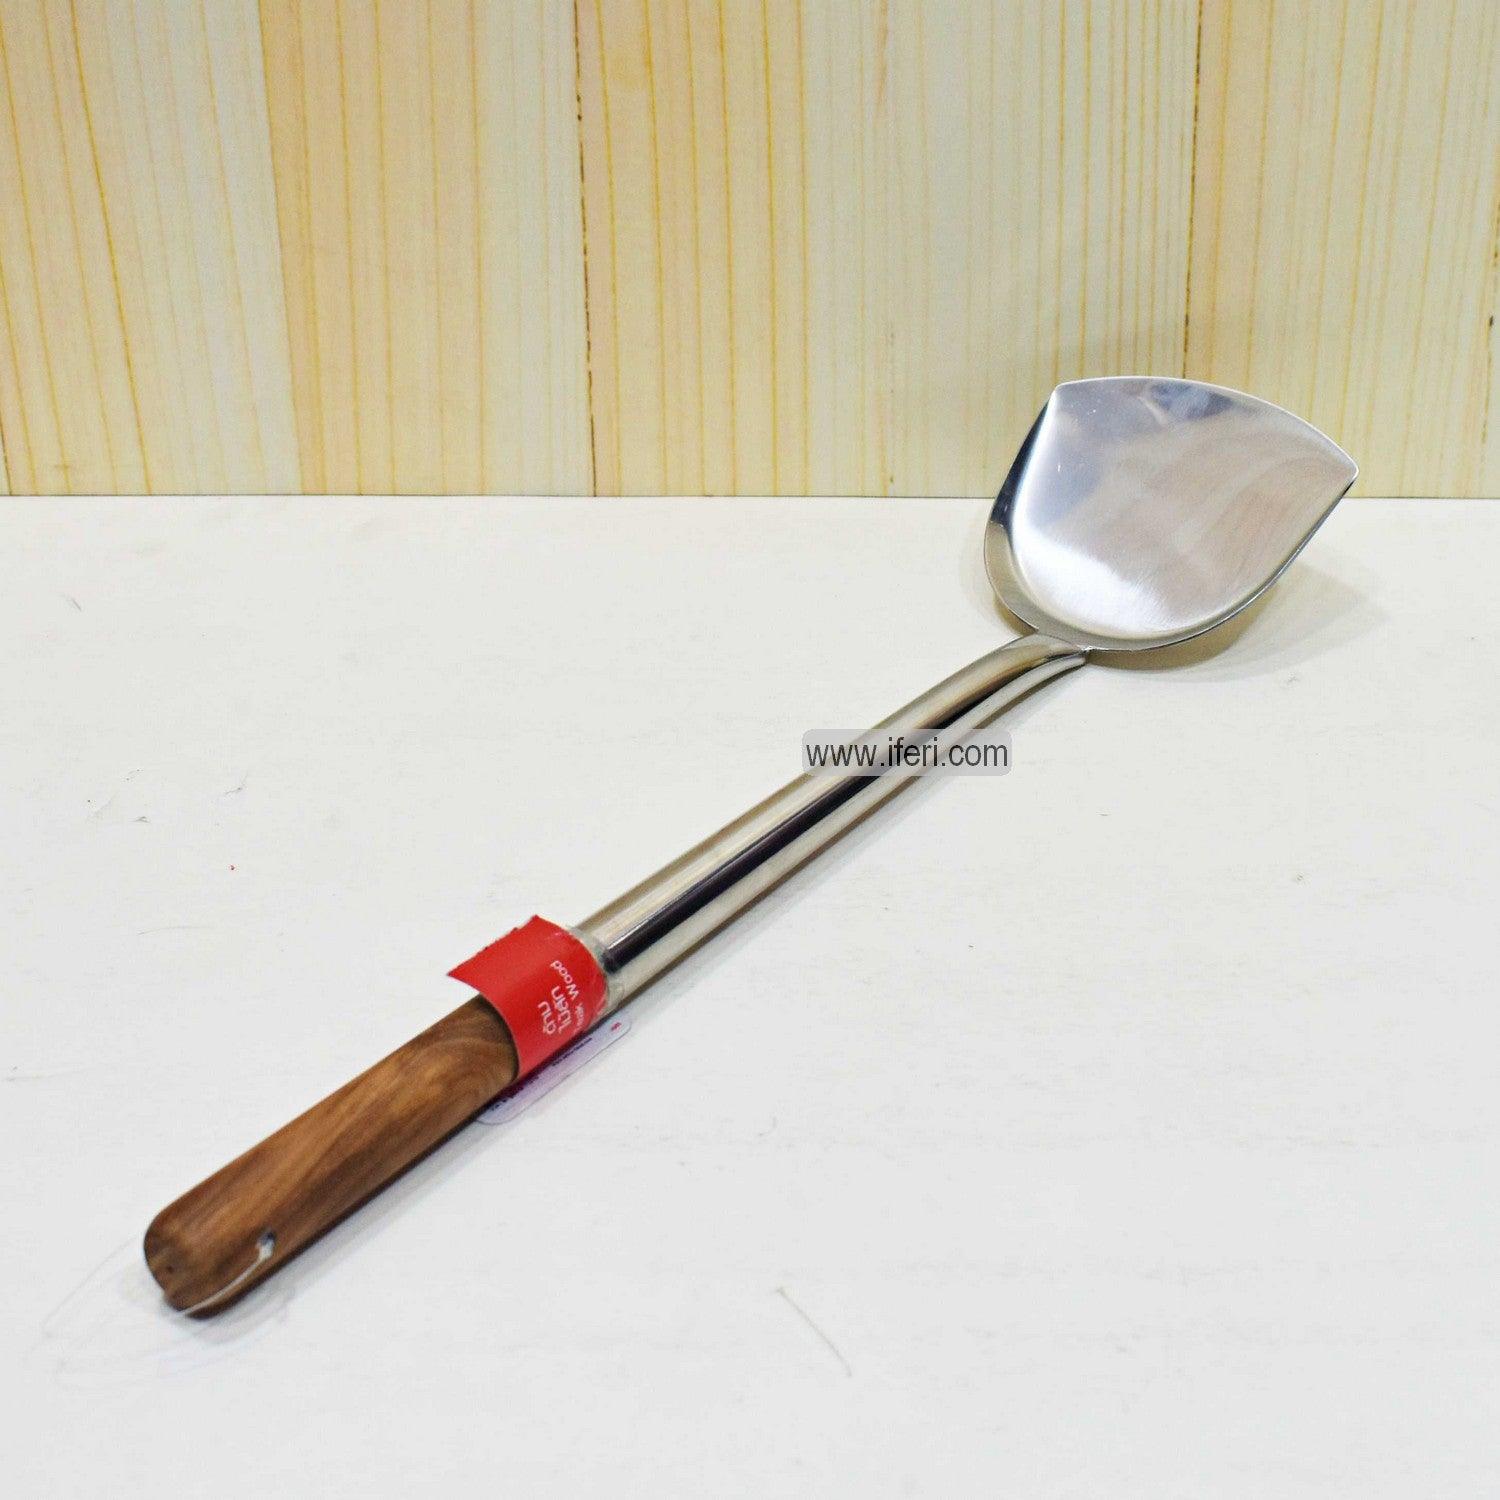 19 inch Chinese Handle Cooking Spoon SN0691 Price in Bangladesh - iferi.com